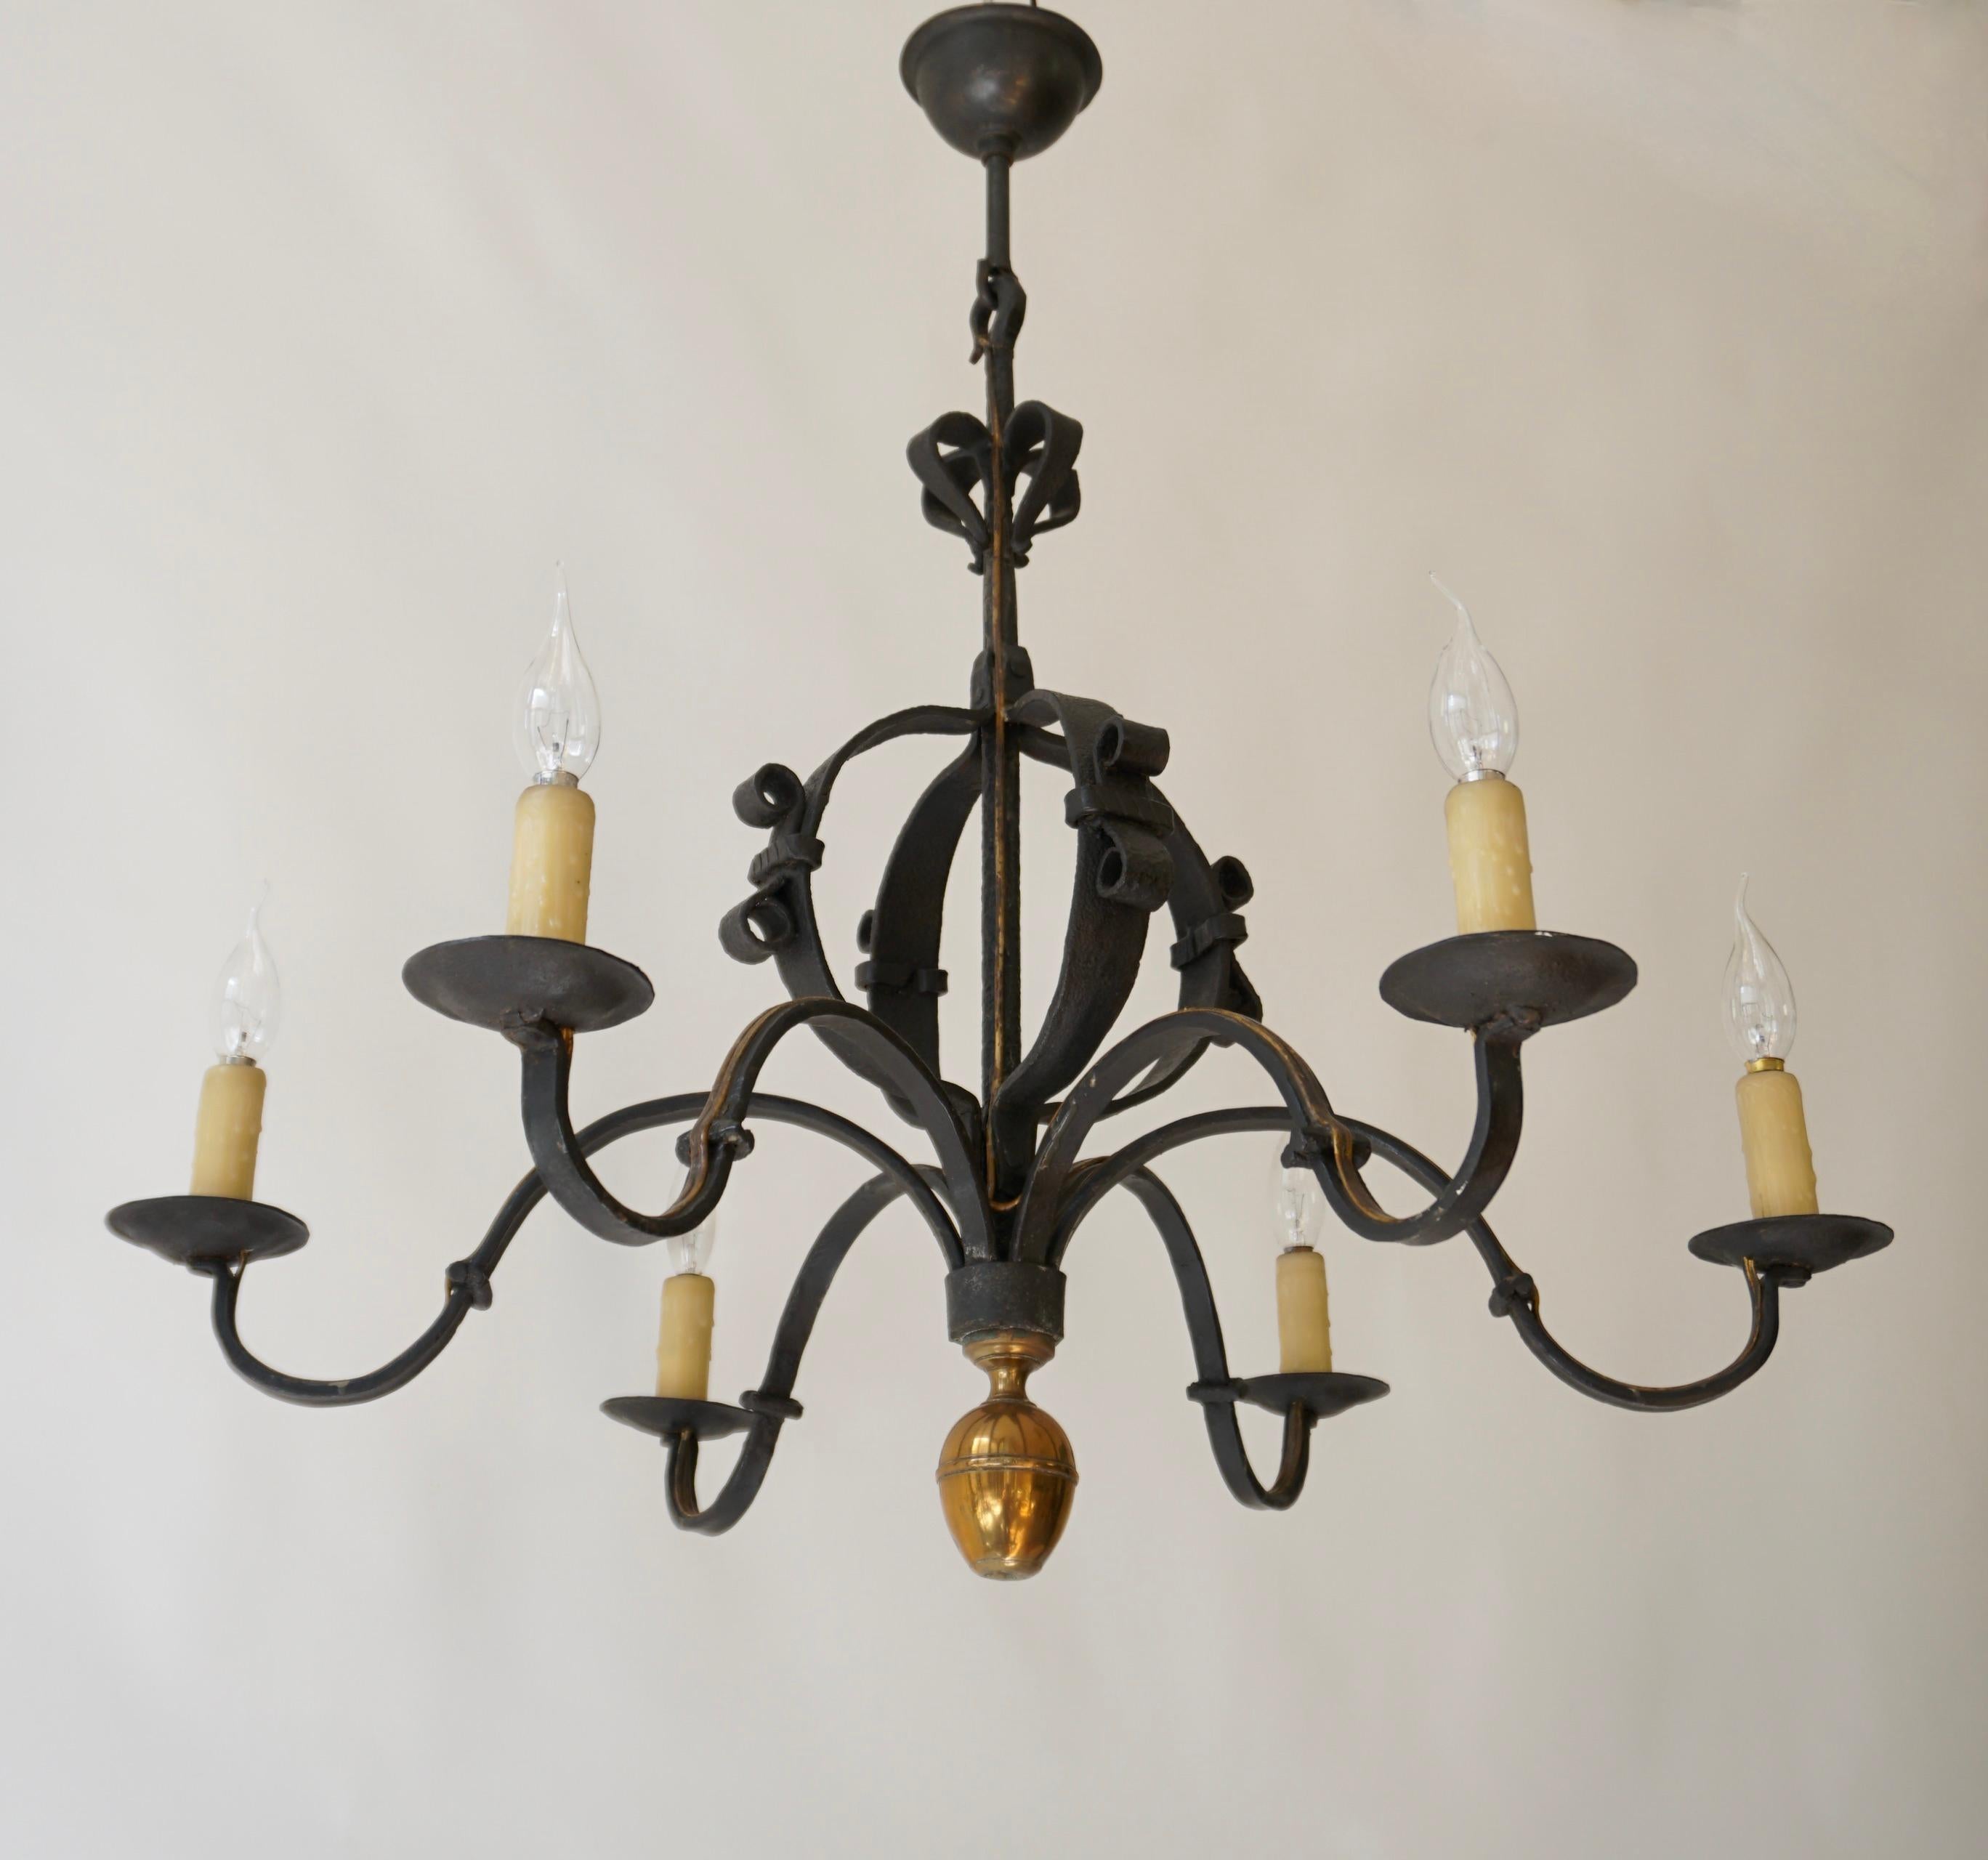 French wrought iron chandelier has six candelabra arms. This chandeliers would work beautiful over a pool table, kitchen island, dining table, bar, or entrance hall. 


Diameter 33.4